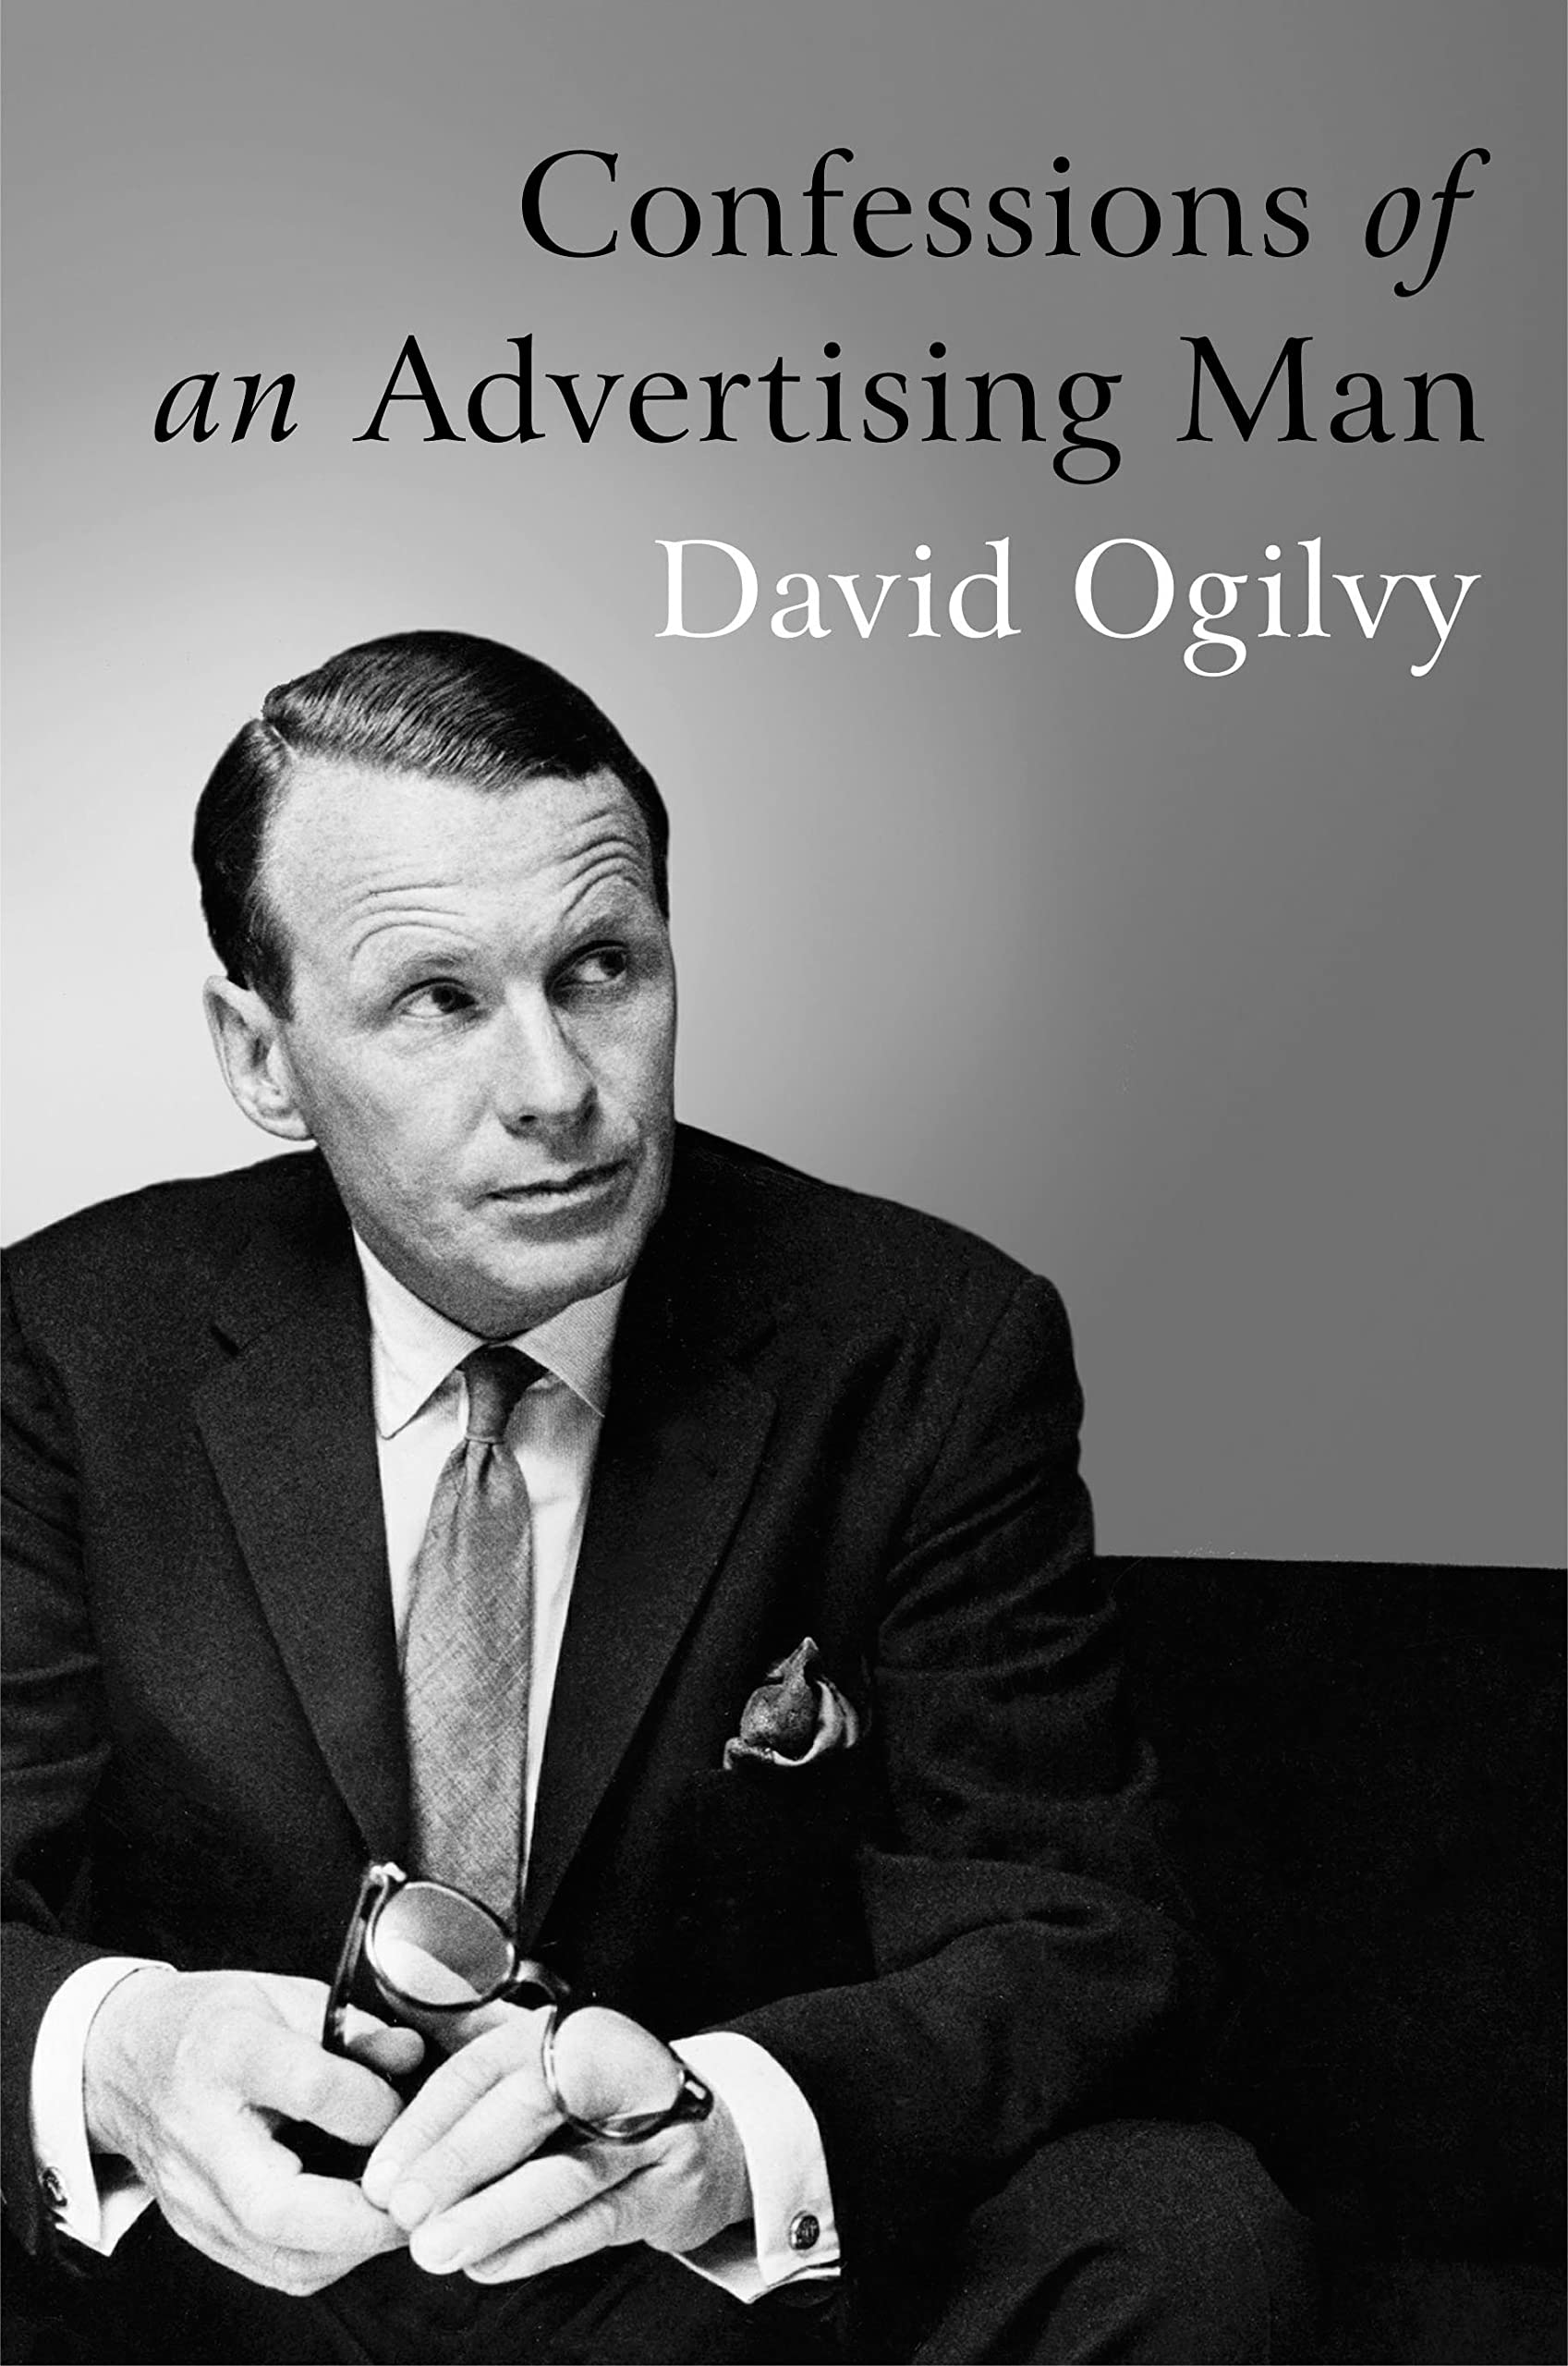 Book "Confessions of an Advertising Man"